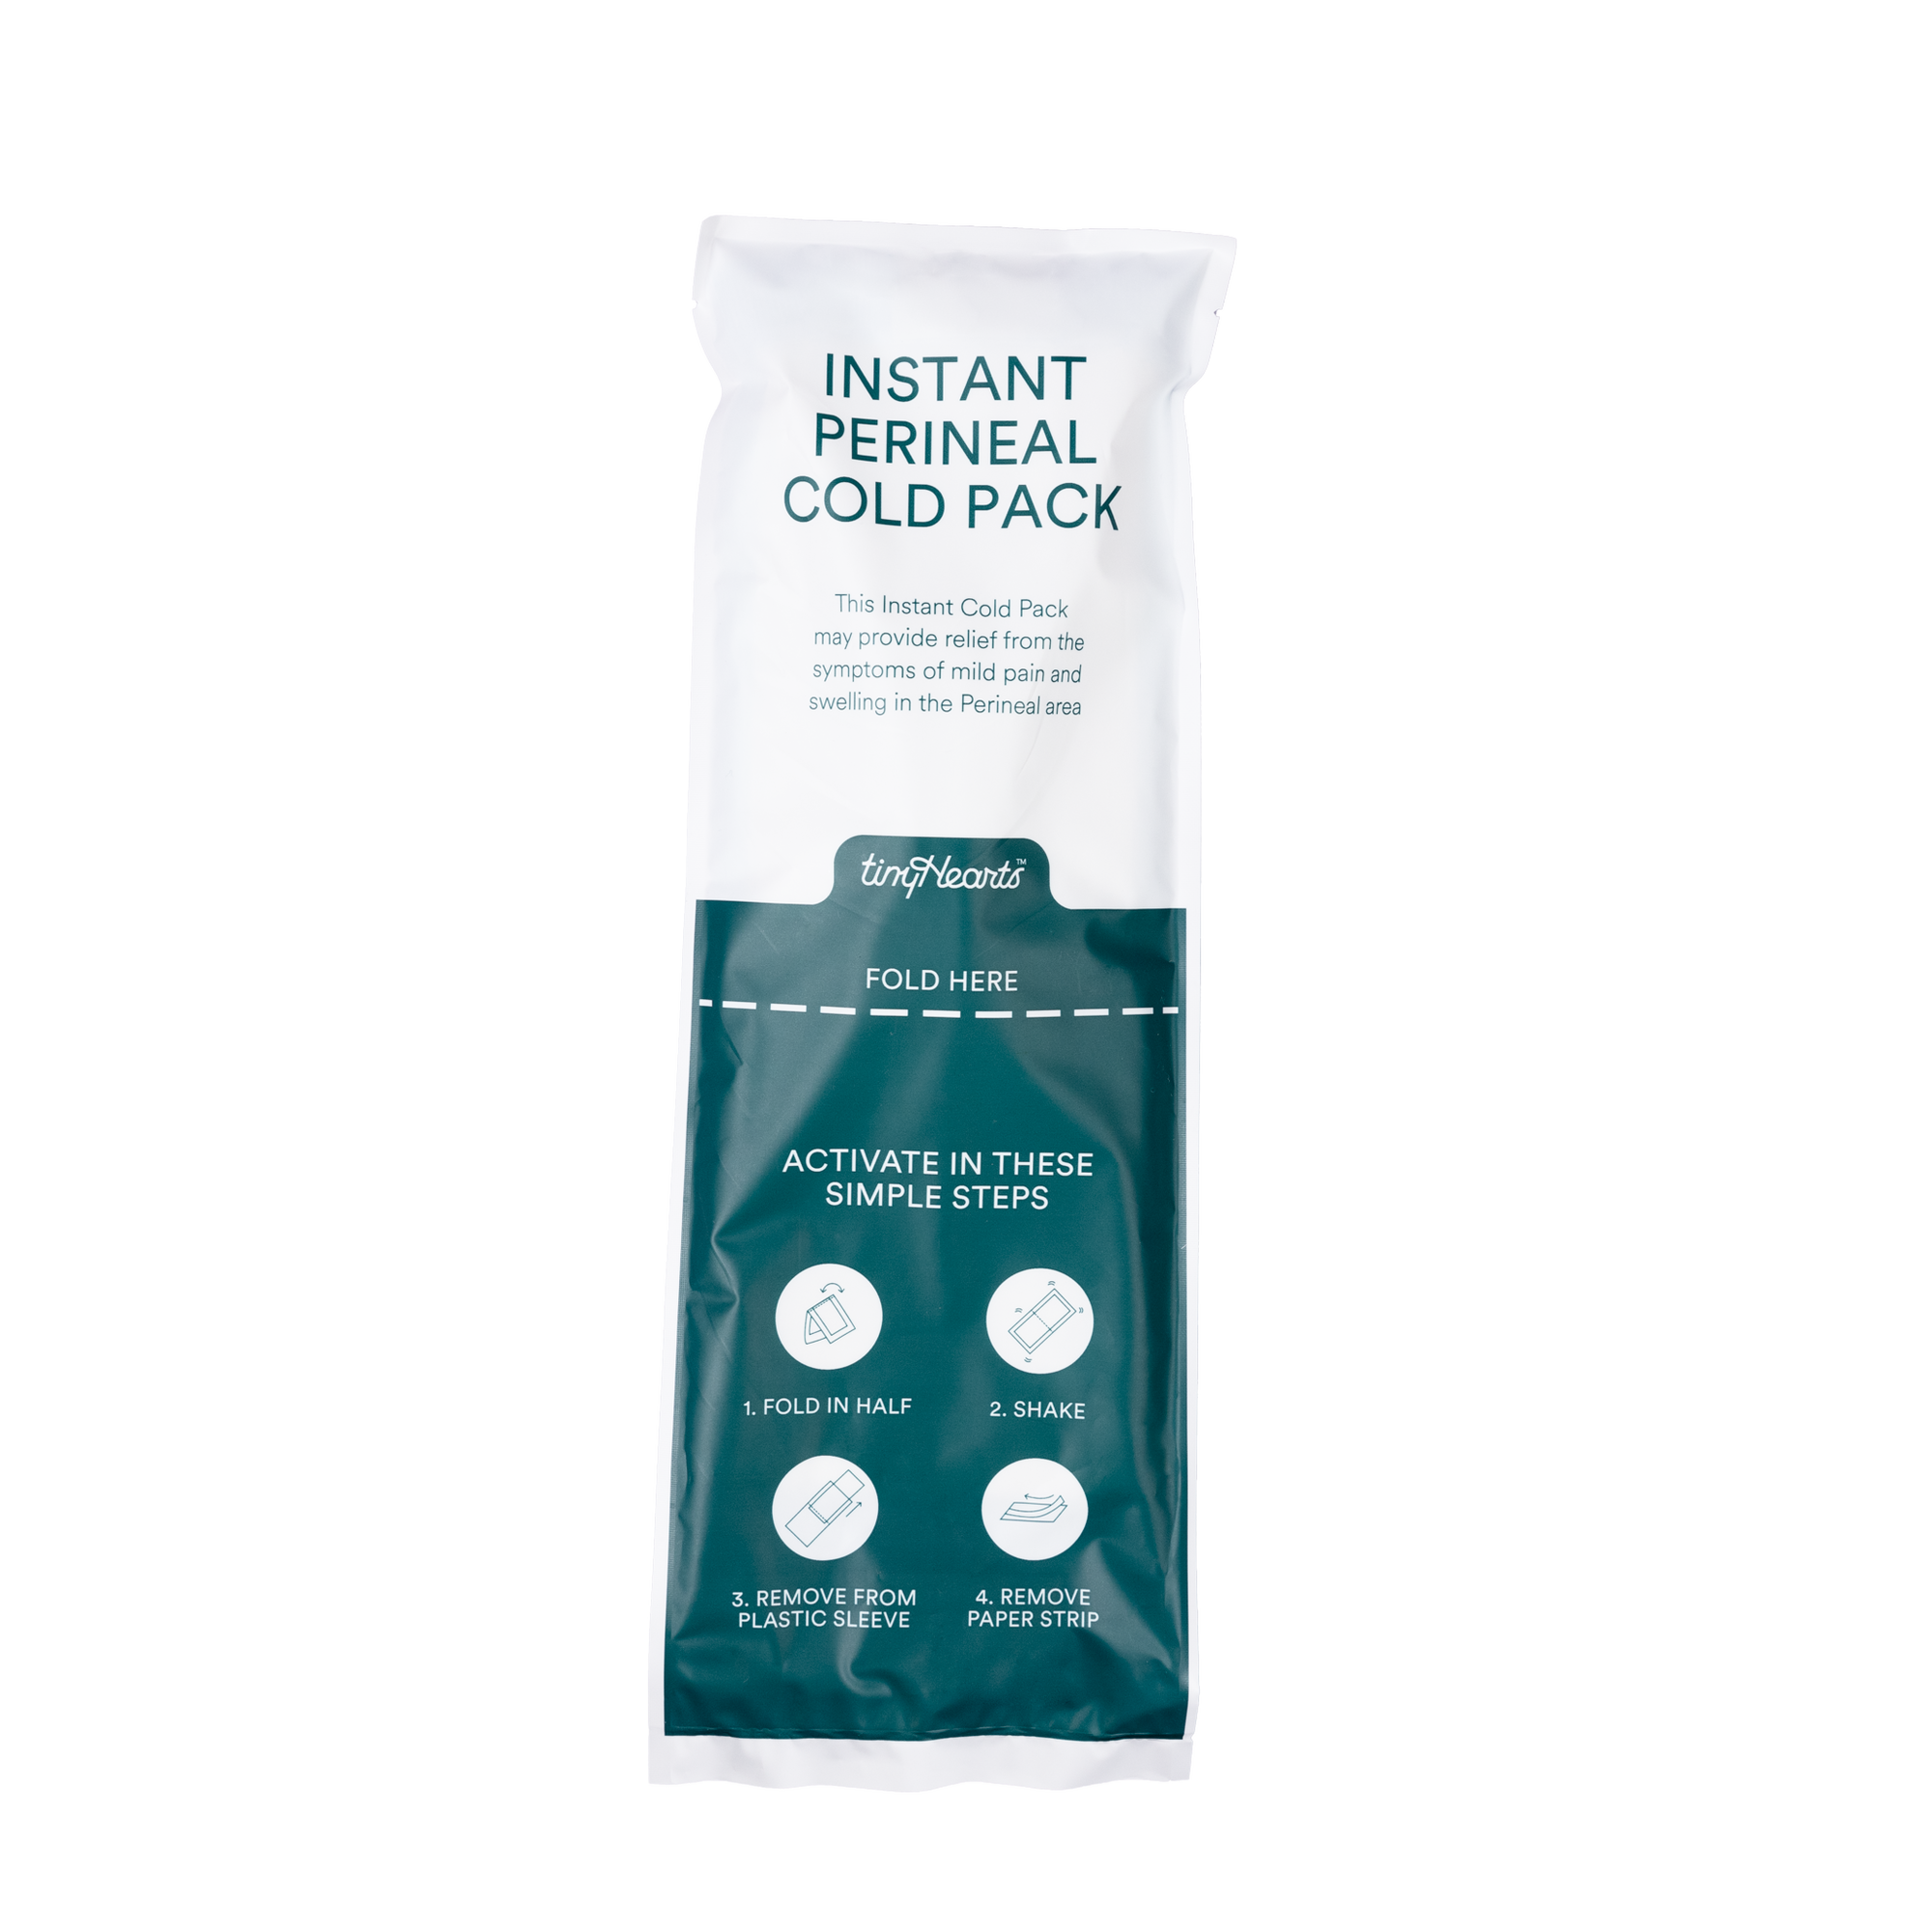 Instant Perineal Cold Pack - 2 Pack